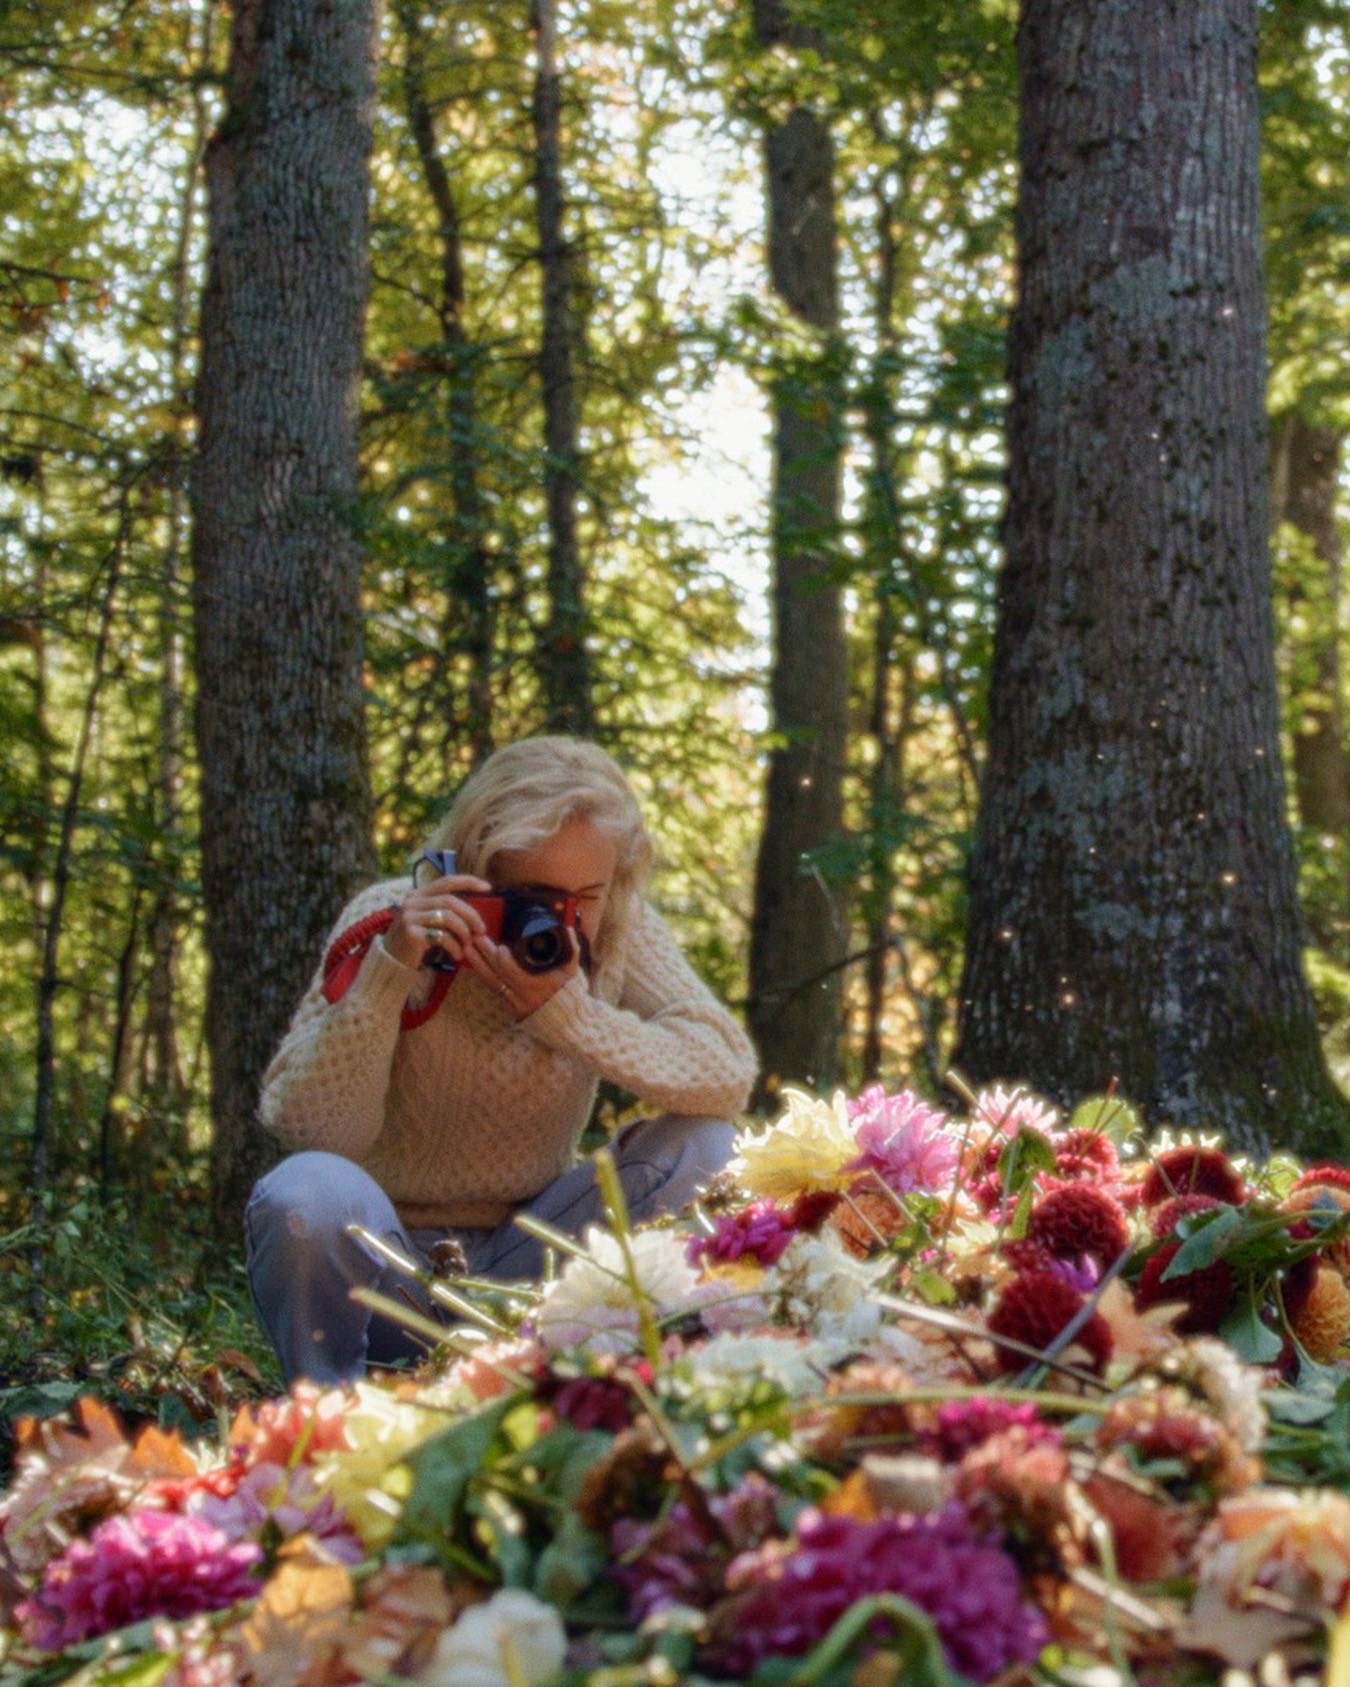 In celebration of Earth Day, Fotografiska New York is screening &ldquo;Eat Flowers,&rdquo; a short film by River Finlay and Cig Harvey.

The film is playing at the museum in the Loft TODAY as a special installation in celebration of Earth Day. No add